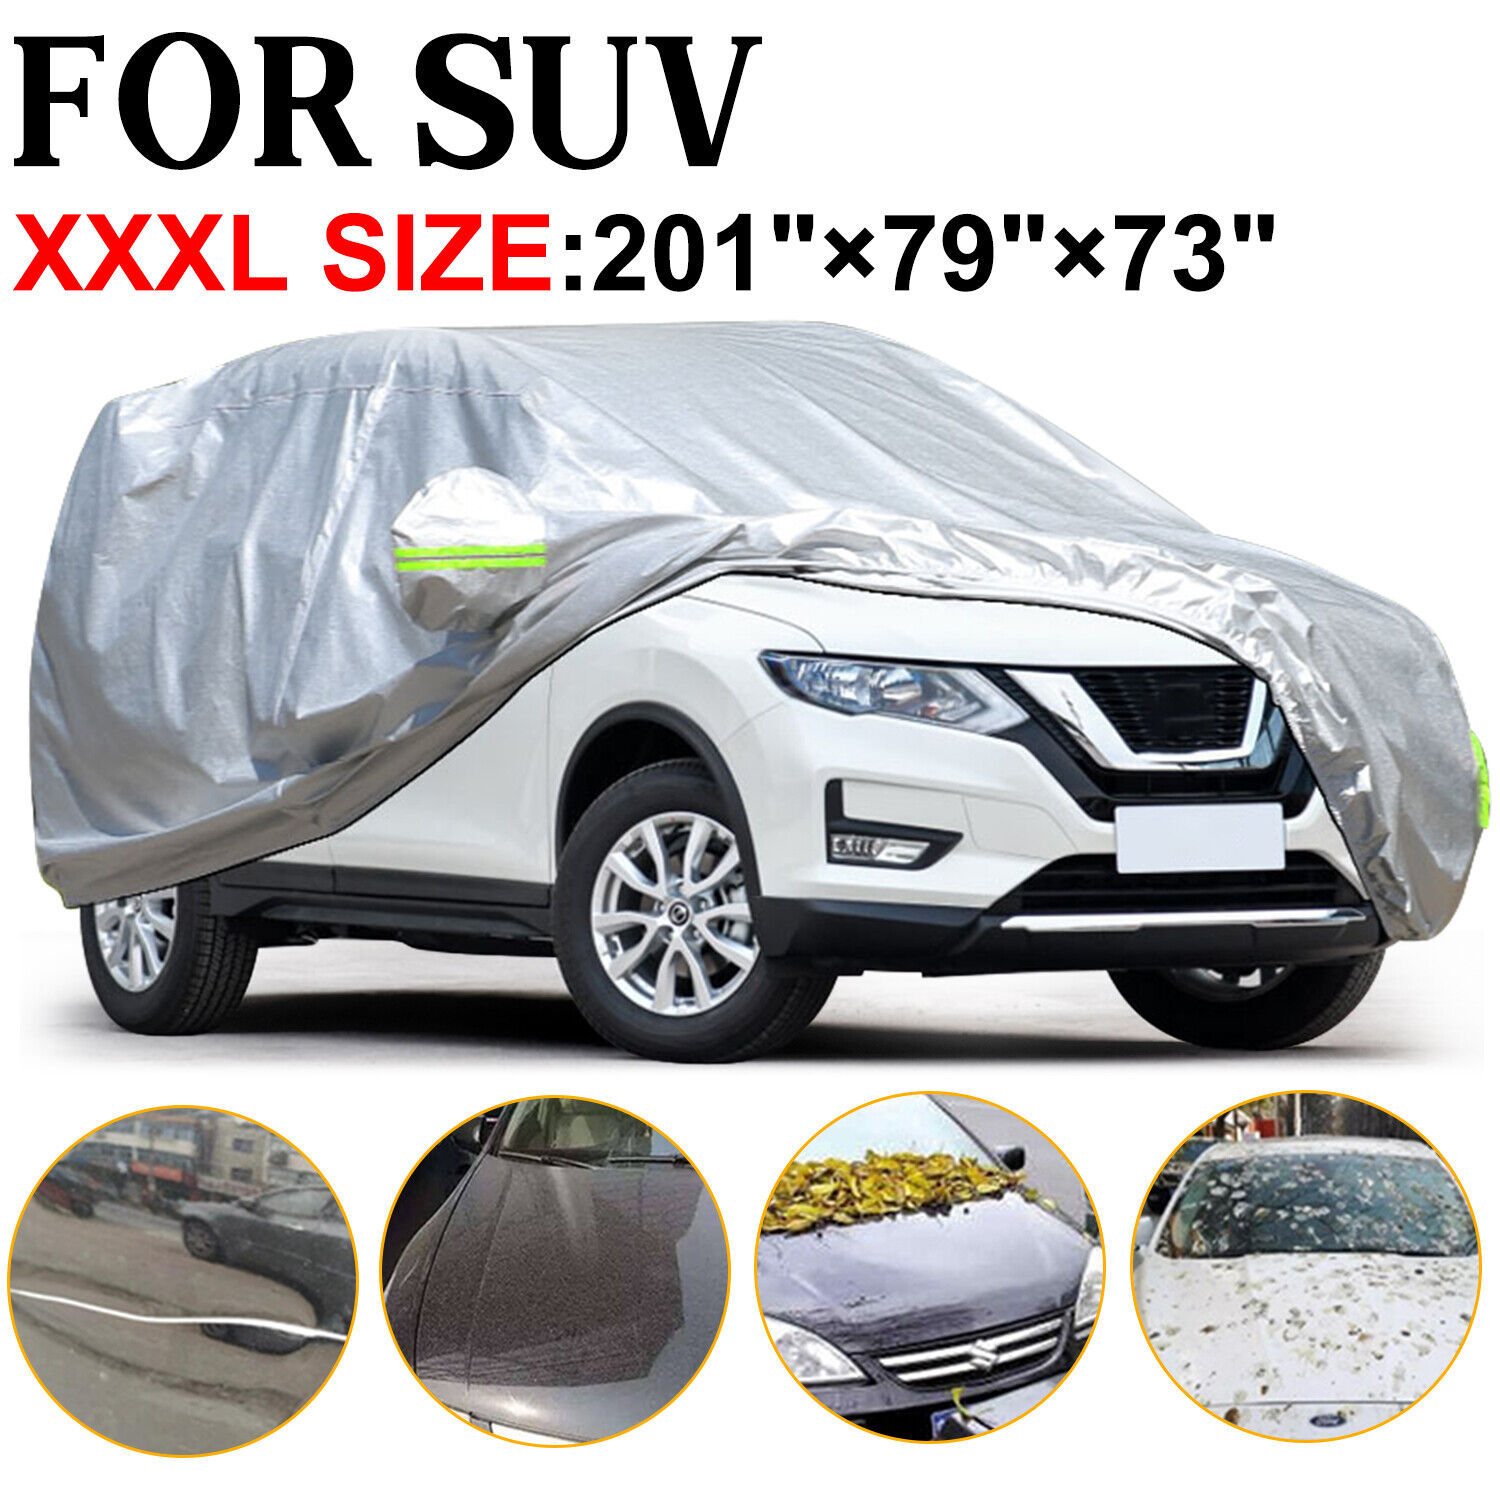 Outdoor Full Car SUV Cover Waterproof Rain Snow UV Resistant All Weather Protect